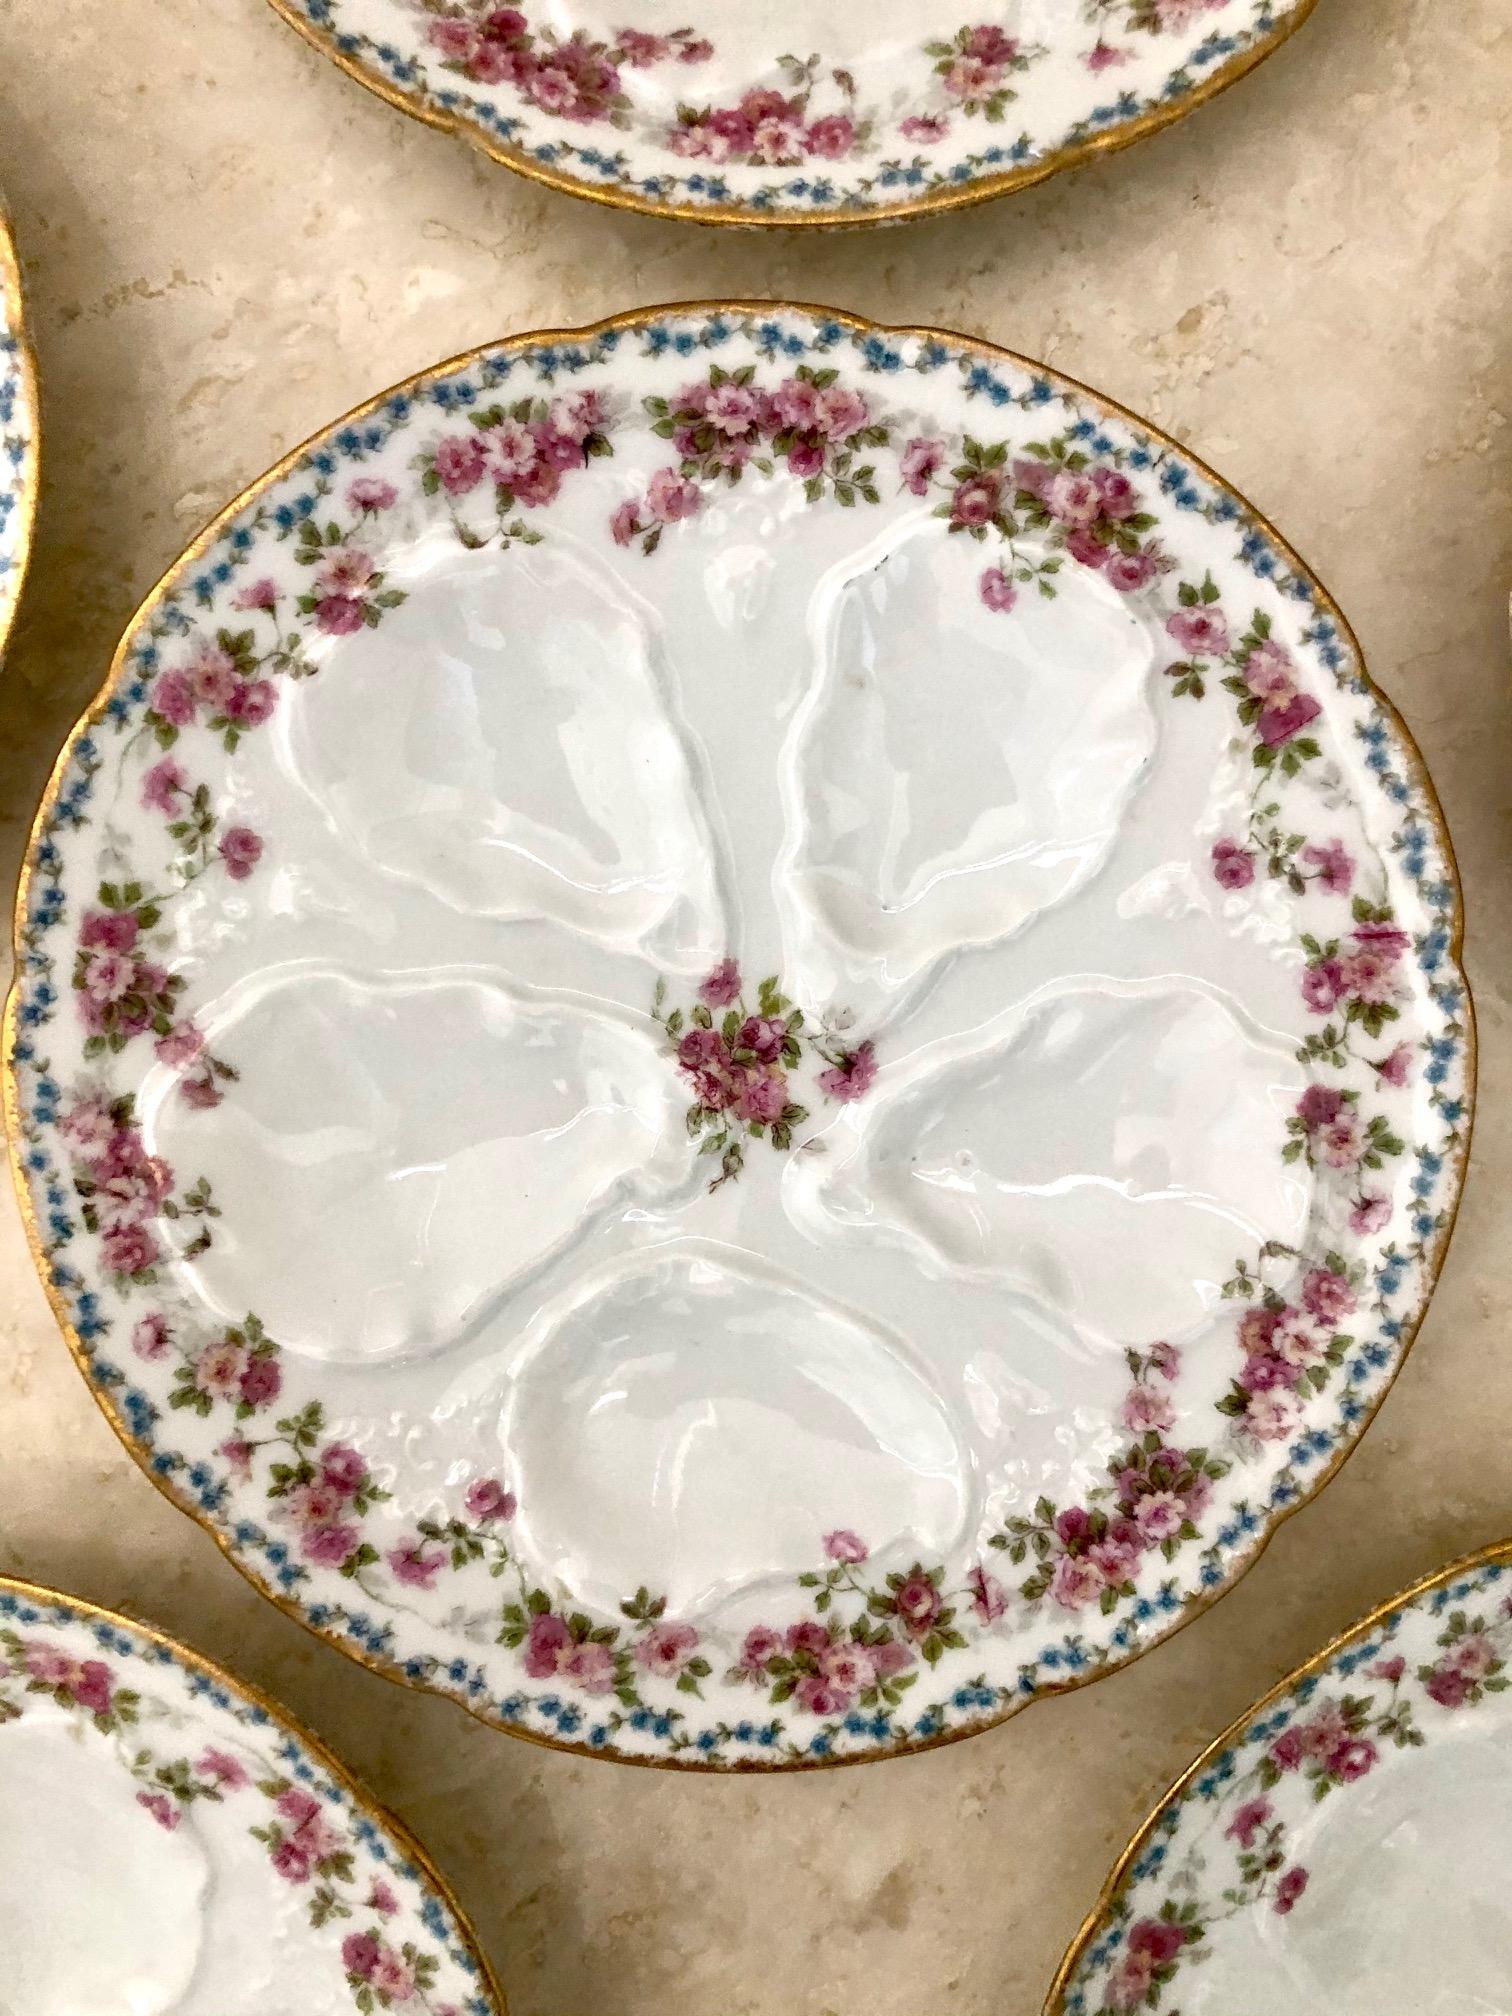 Elegant and Classic, this Limoges oyster plate is contoured for 5 oysters,
and features a charming pattern of pink and purple flowers with a brushed
gold rim. Plate measures about 8 and 5/8